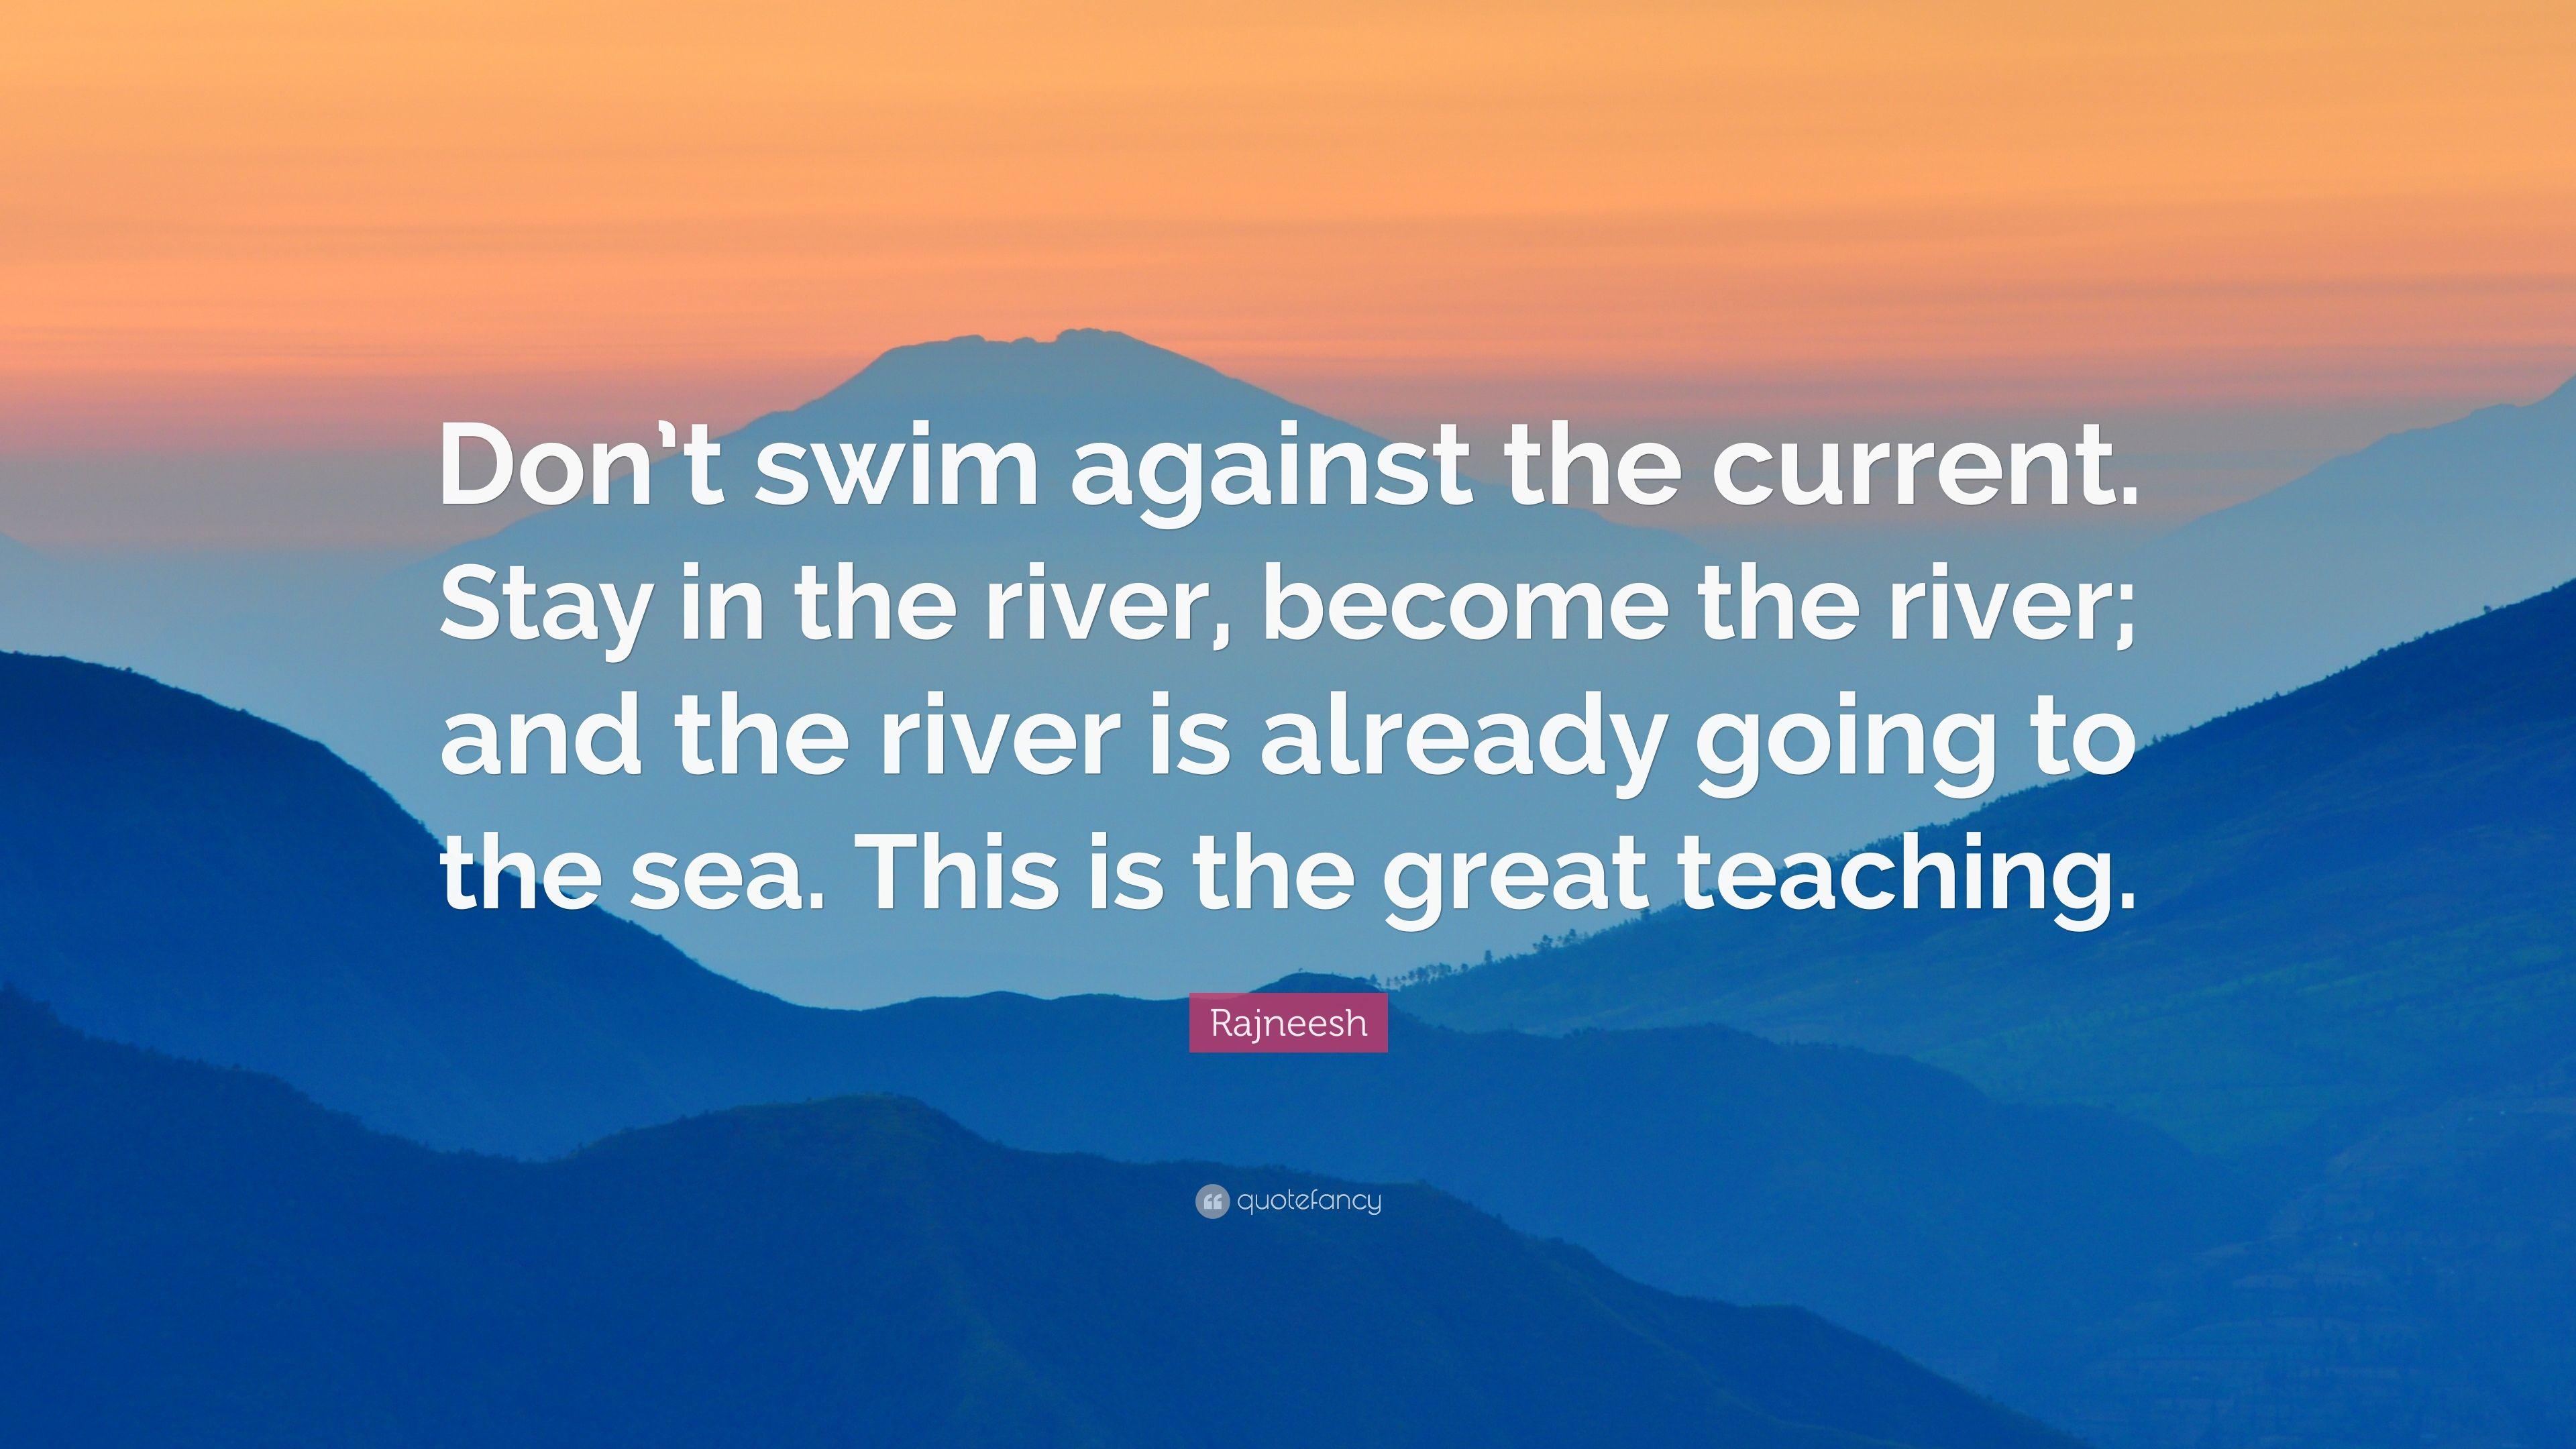 Rajneesh Quote: “Don't swim against the current. Stay in the river